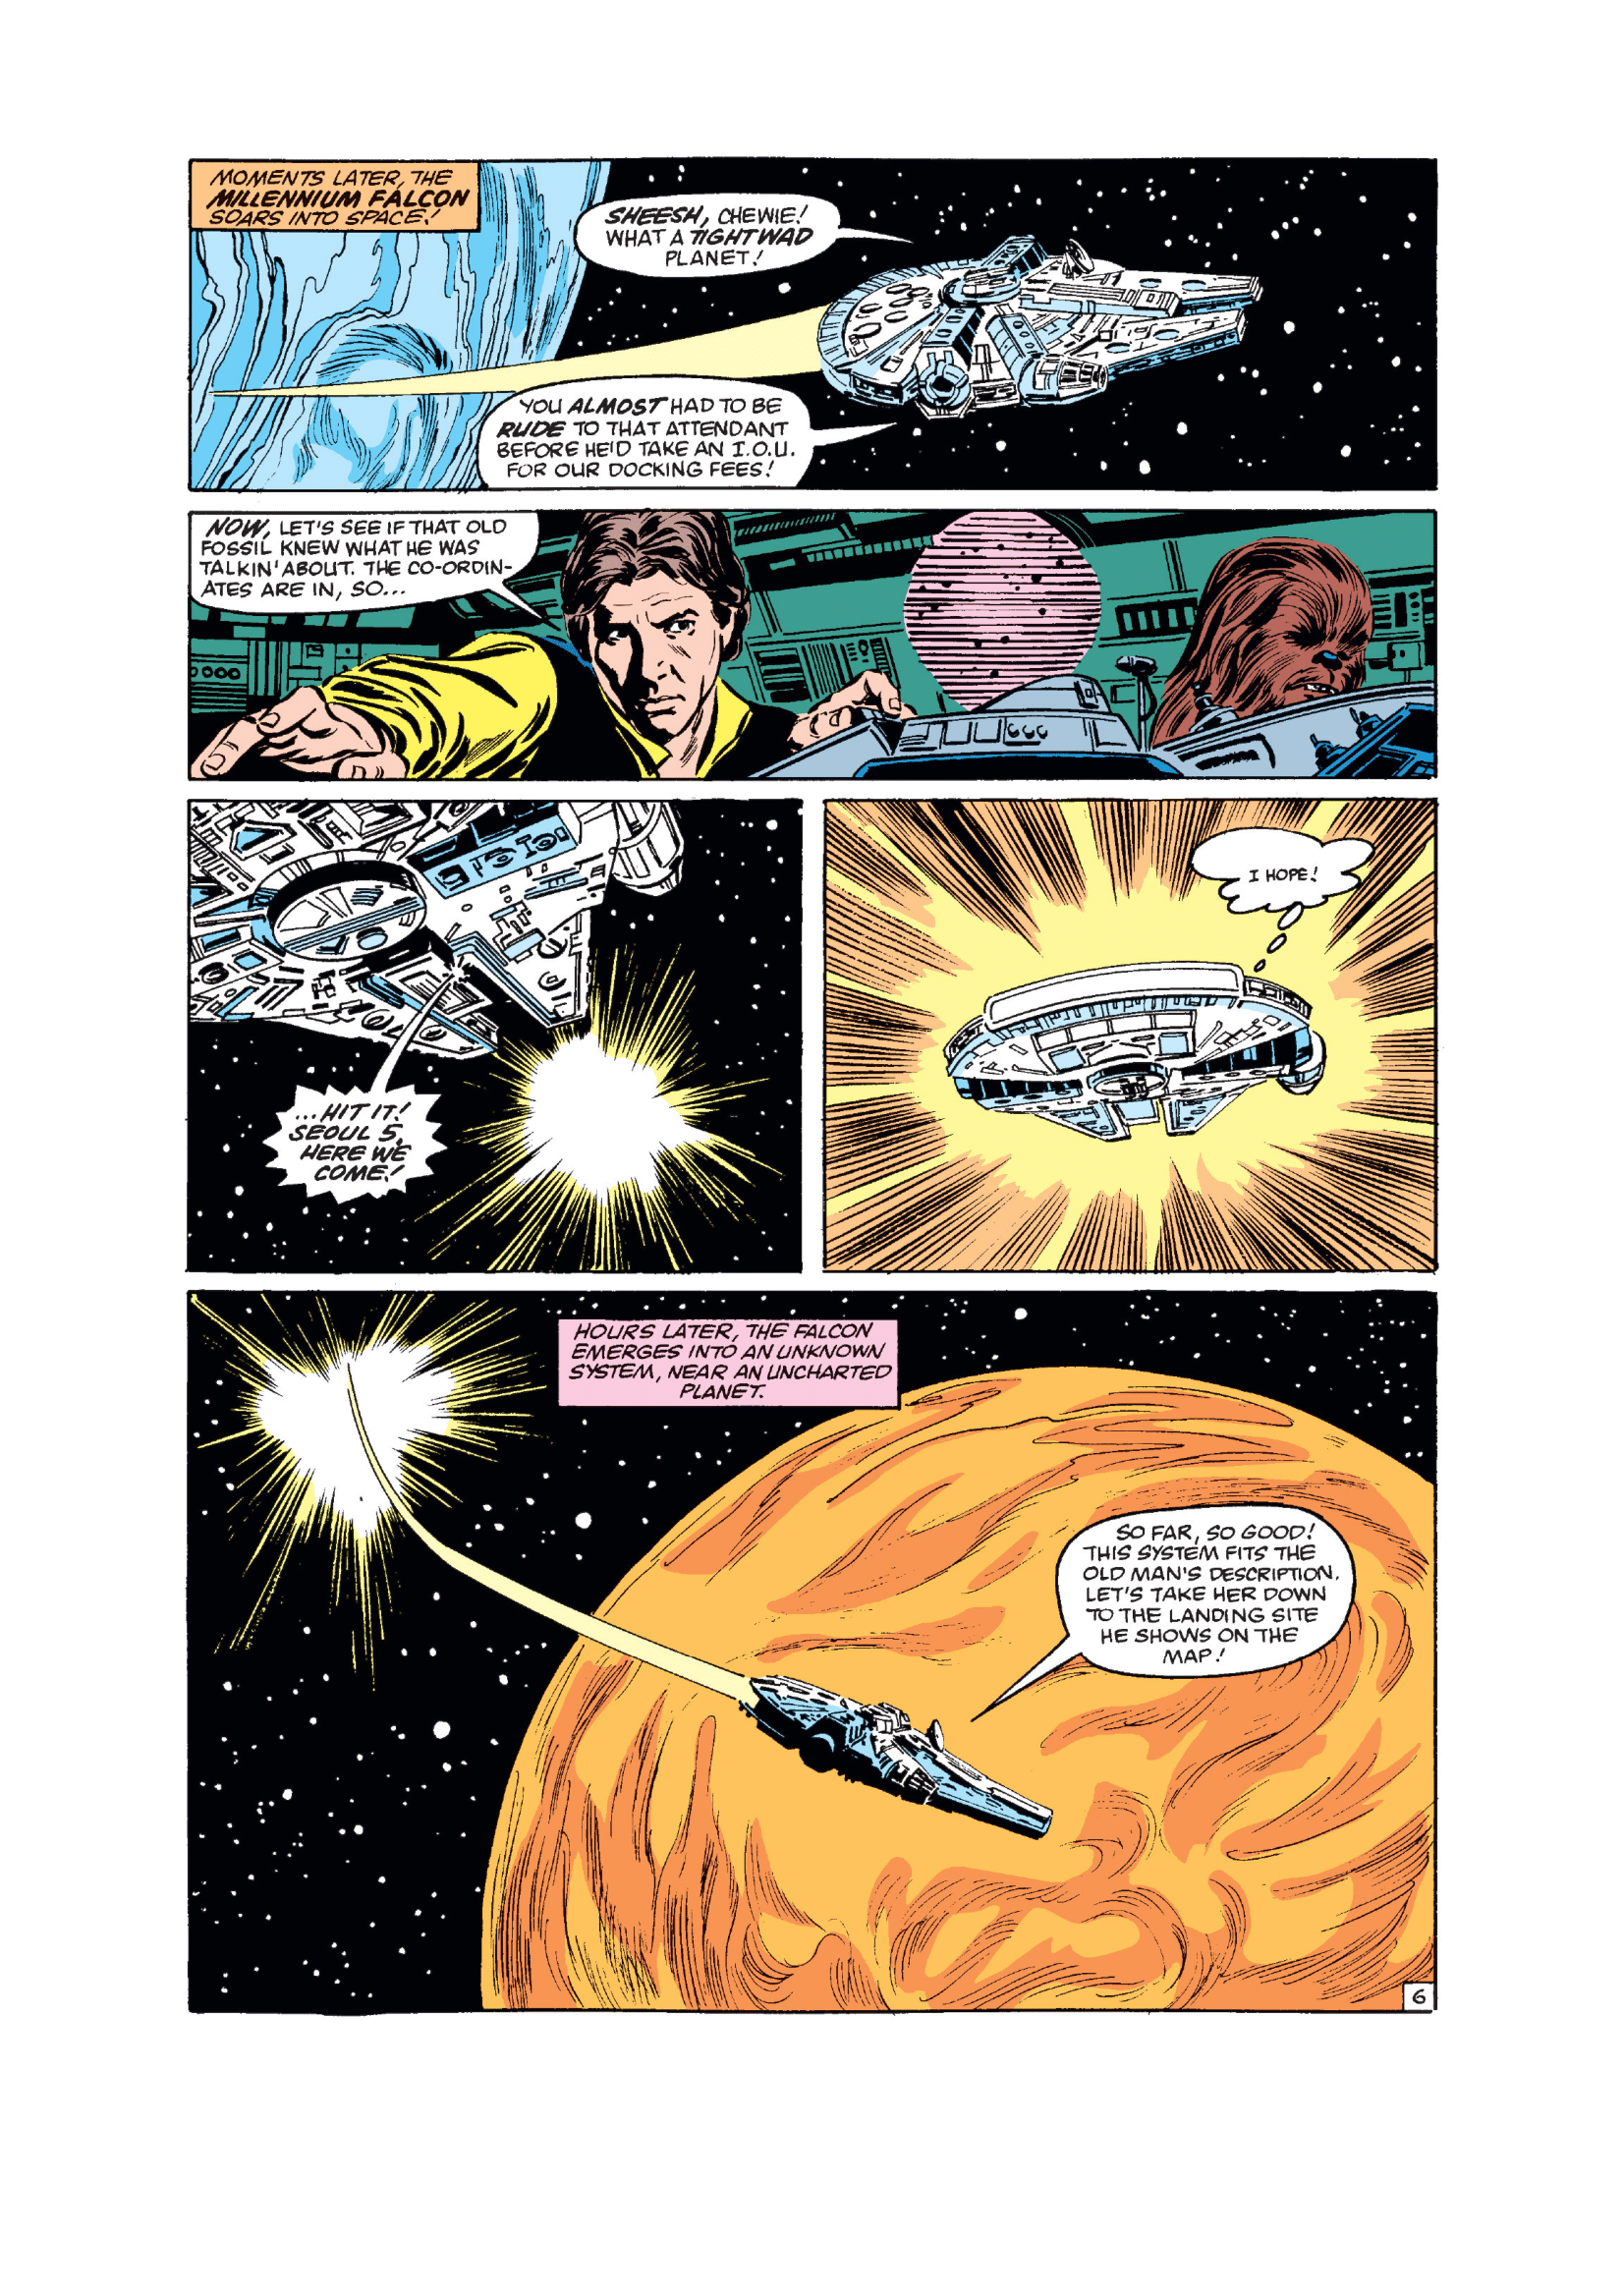 Star Wars (1977) Issue #_84 - Read Star Wars (1977) Issue #_84 comic online in high quality-14.png